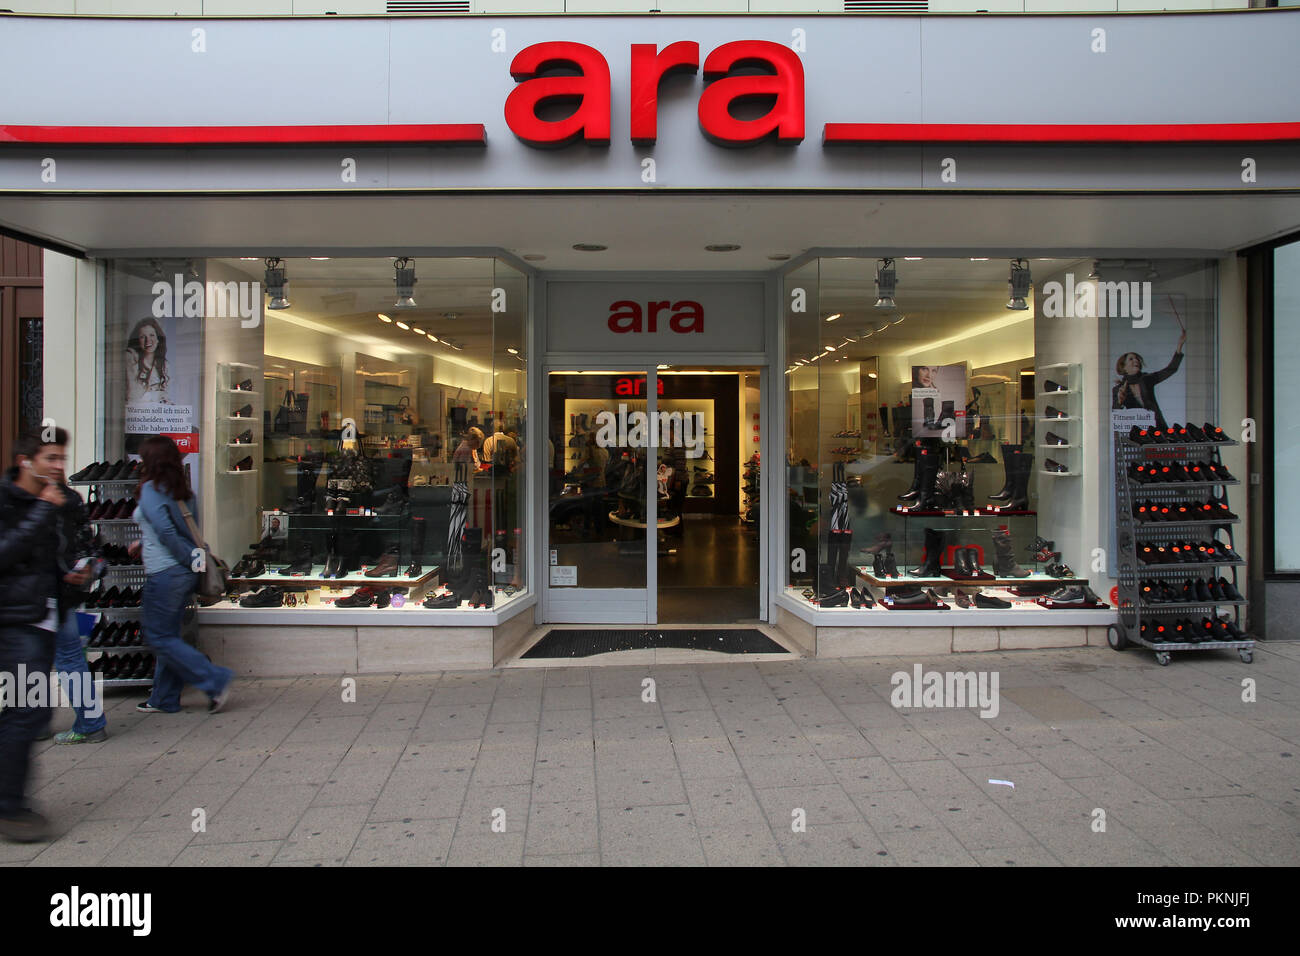 VIENNA - SEPTEMBER 8: Shoppers walk past Ara footwear store on September 8, Vienna. Ara group exists since 1949, sells shoes in 50 countries a Photo - Alamy